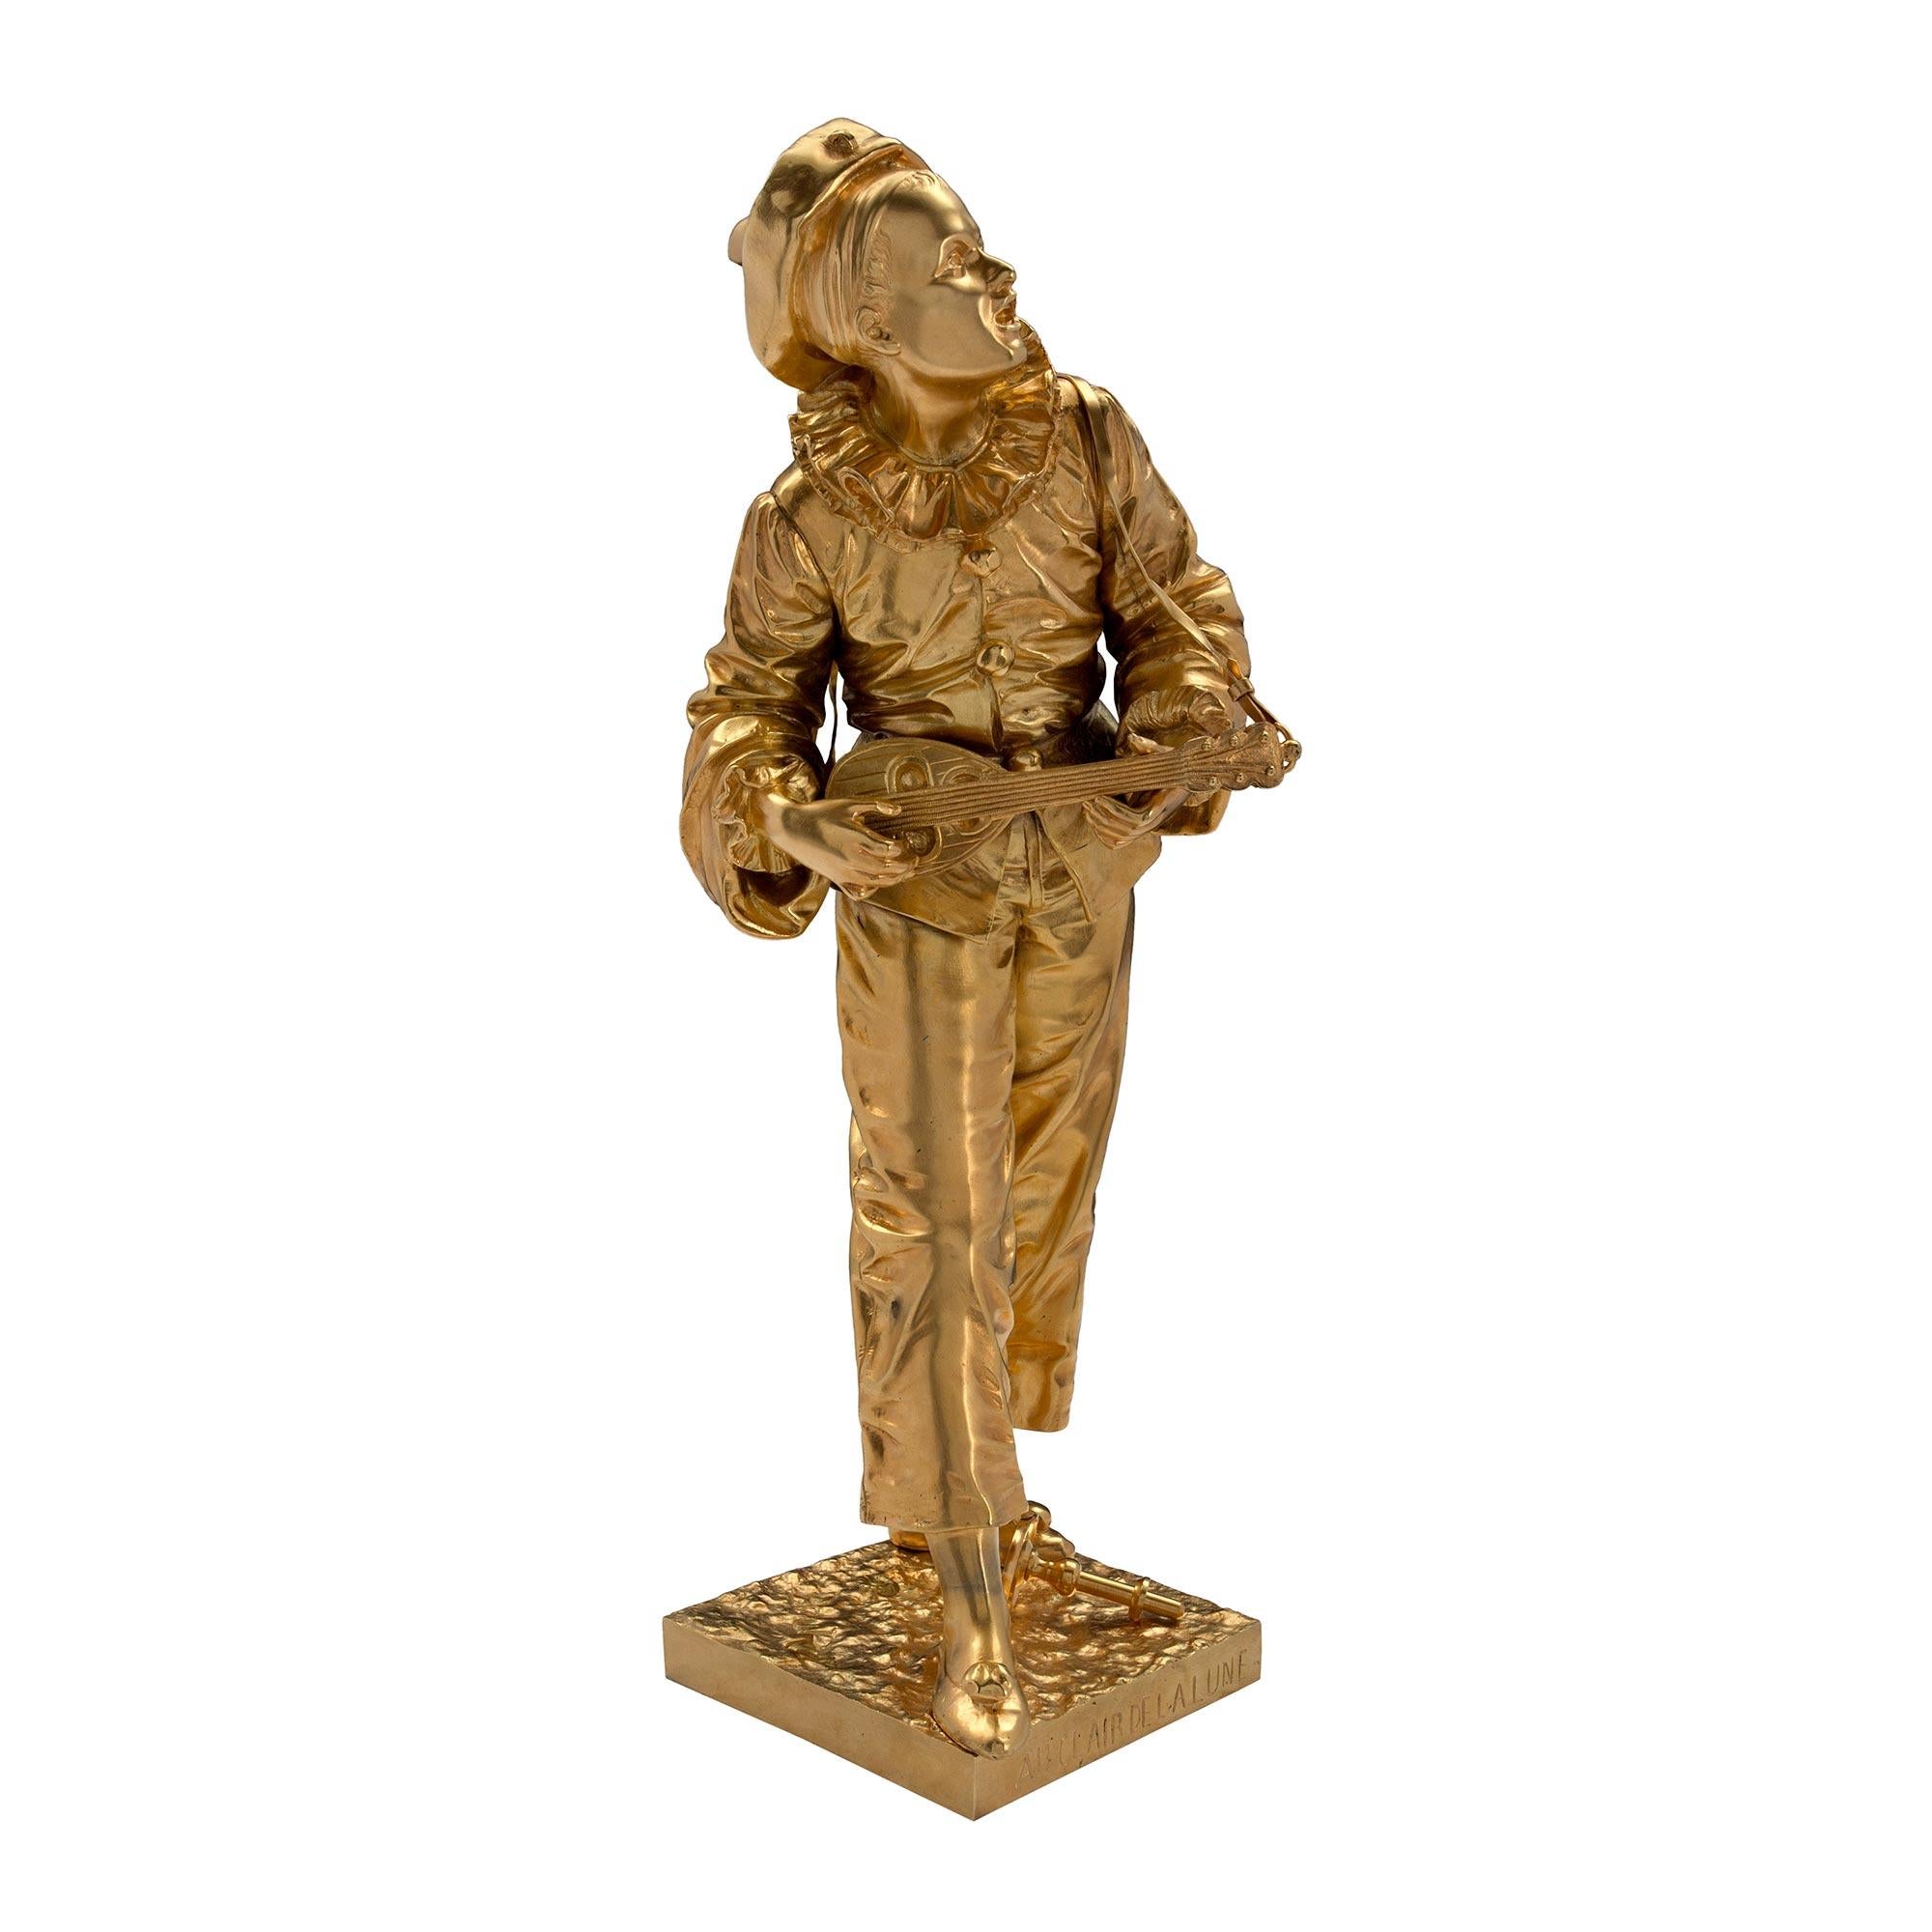 A charming French 19th century Louis XVI st. ormolu statue of Pierrot singing. Pierrot is standing on a square base all dressed in his pantomime outfit playing his ukulele and singing his famous French song for kids 